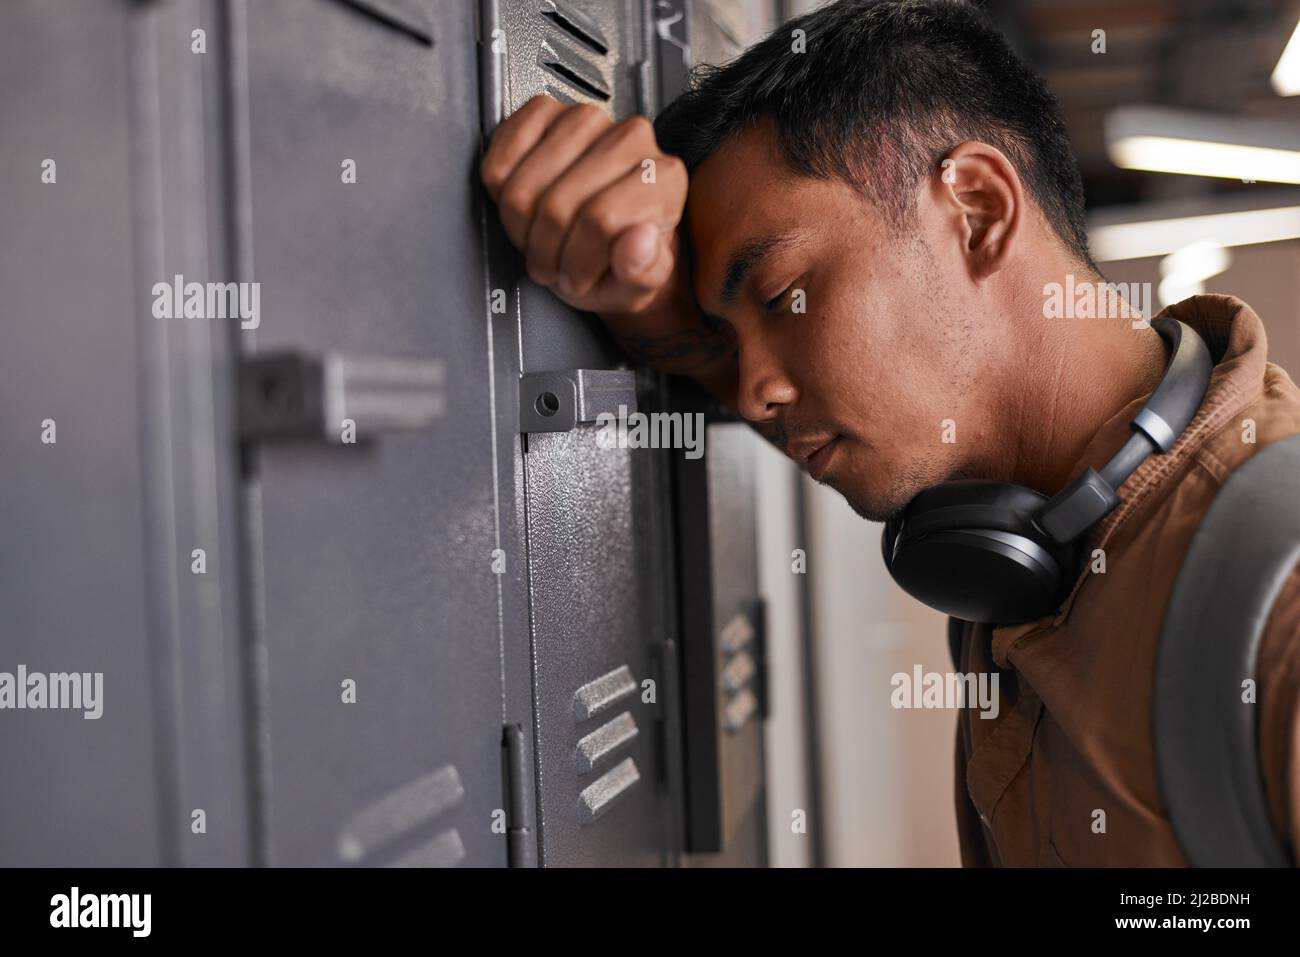 A student leans against campus lockers after getting bad news Stock Photo